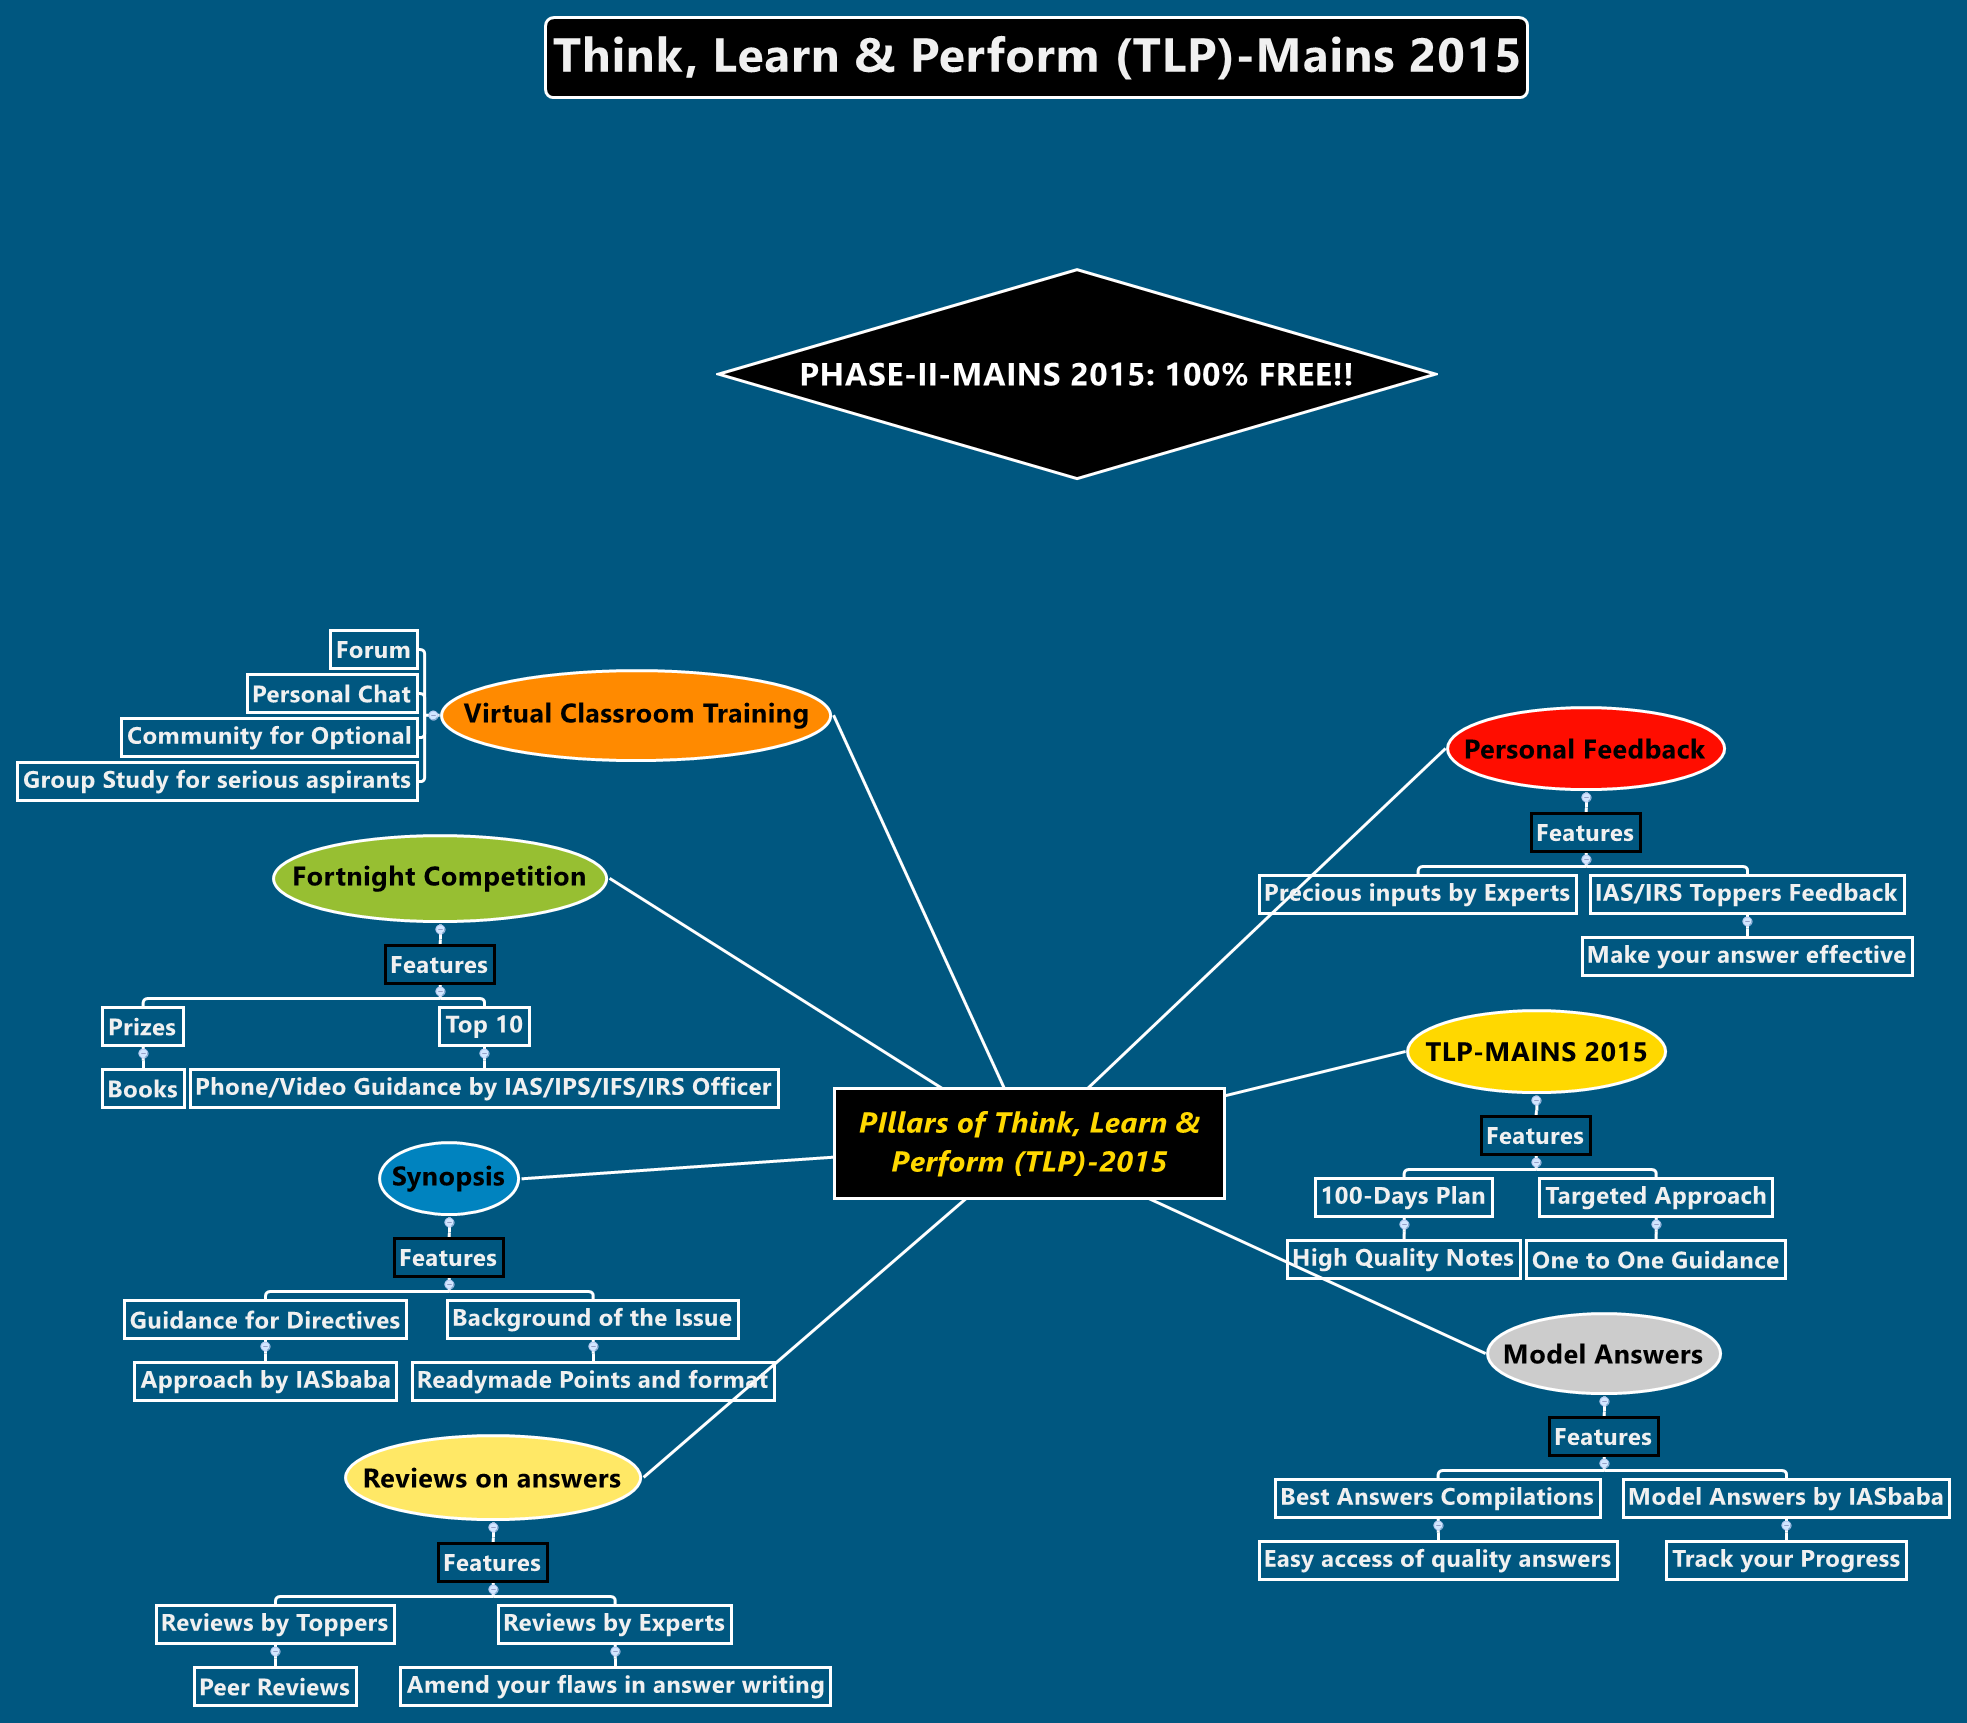 PIllars of Think, Learn & Perform (TLP)-2015